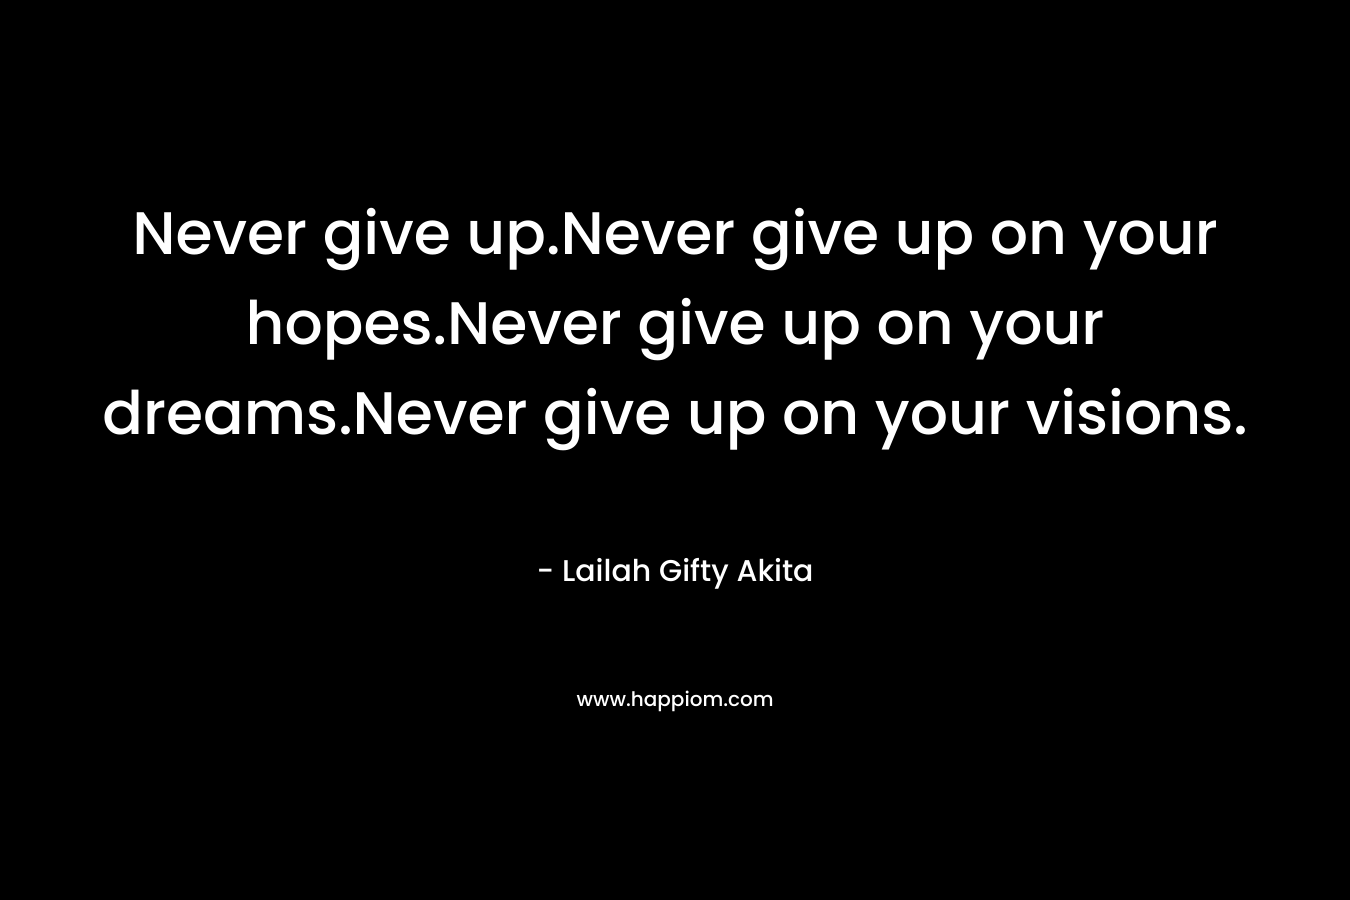 Never give up.Never give up on your hopes.Never give up on your dreams.Never give up on your visions.